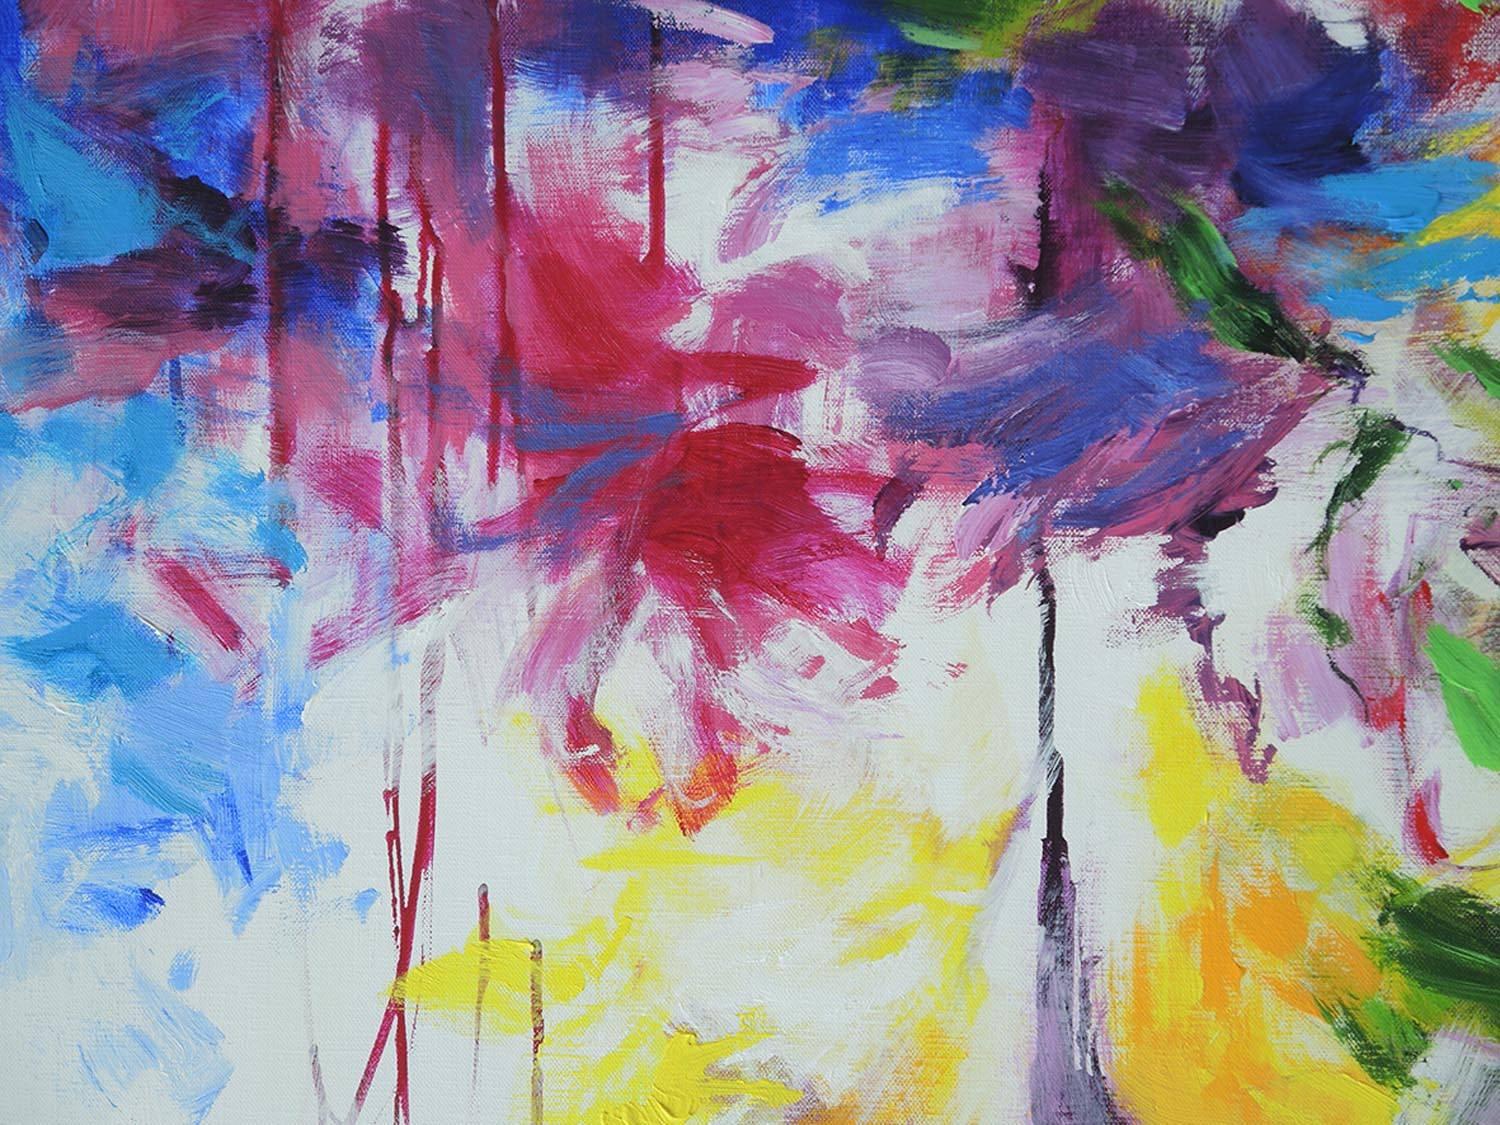 The Era of Flowers, bright and bold abstract painting - Painting by Mary Chaplin